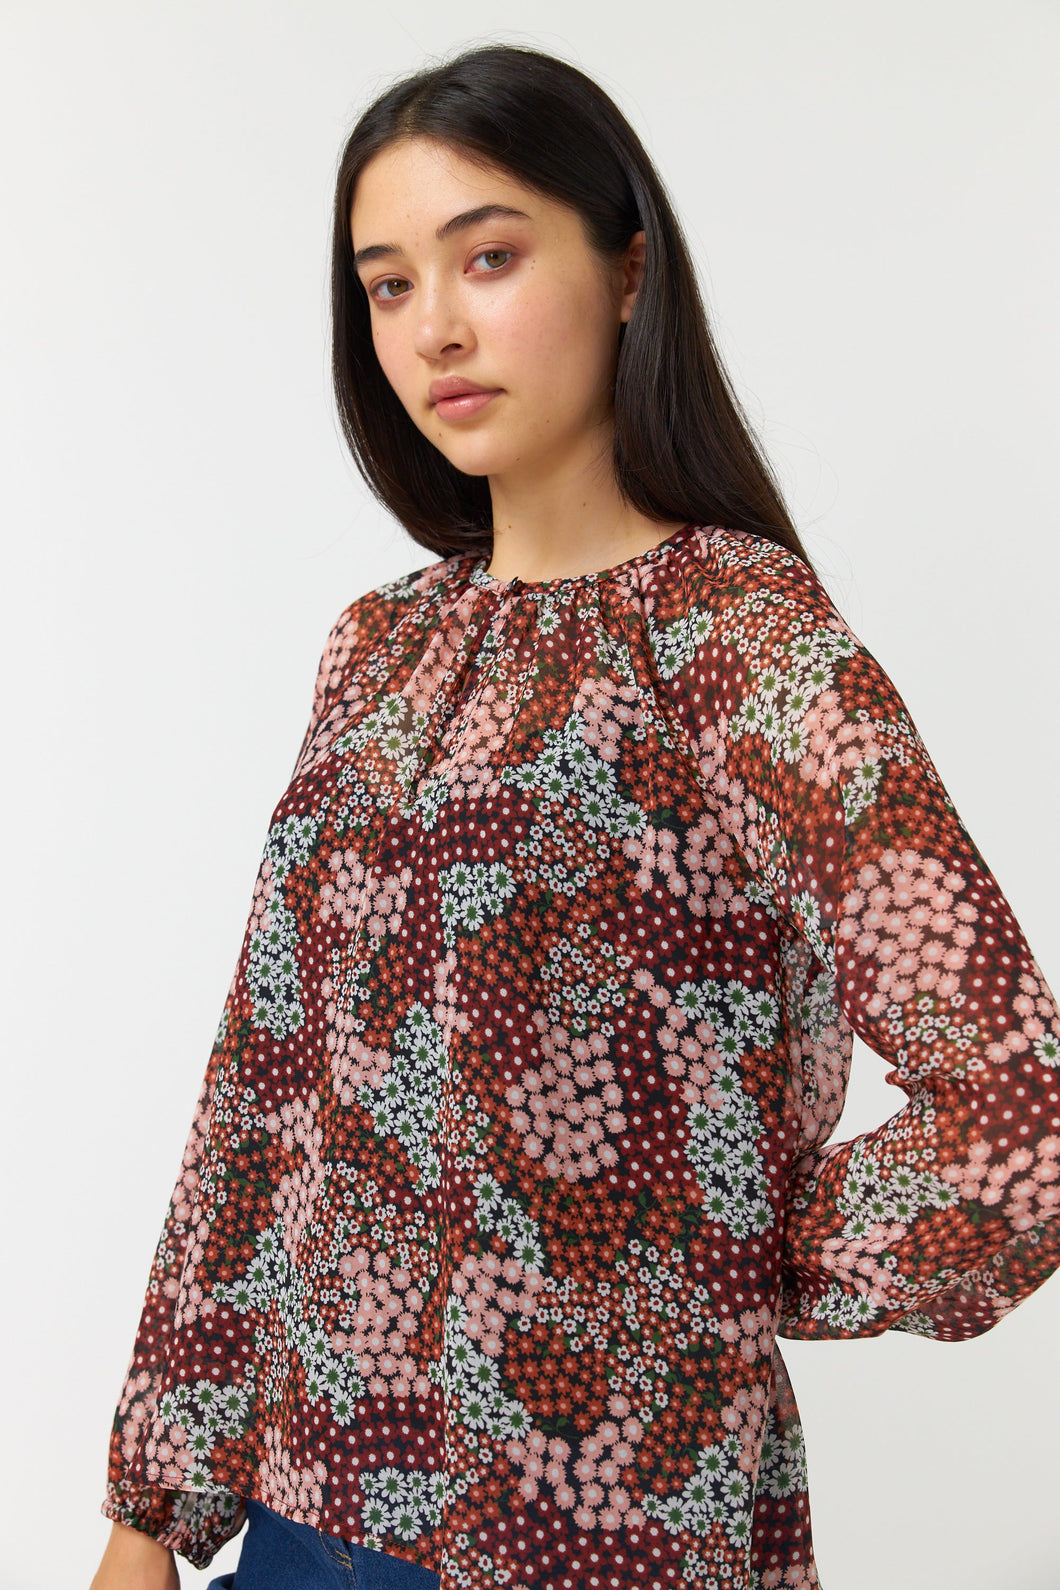 Sylvester by Kate Slyvester Patchwork Floral Top - Berry  Hyde Boutique   